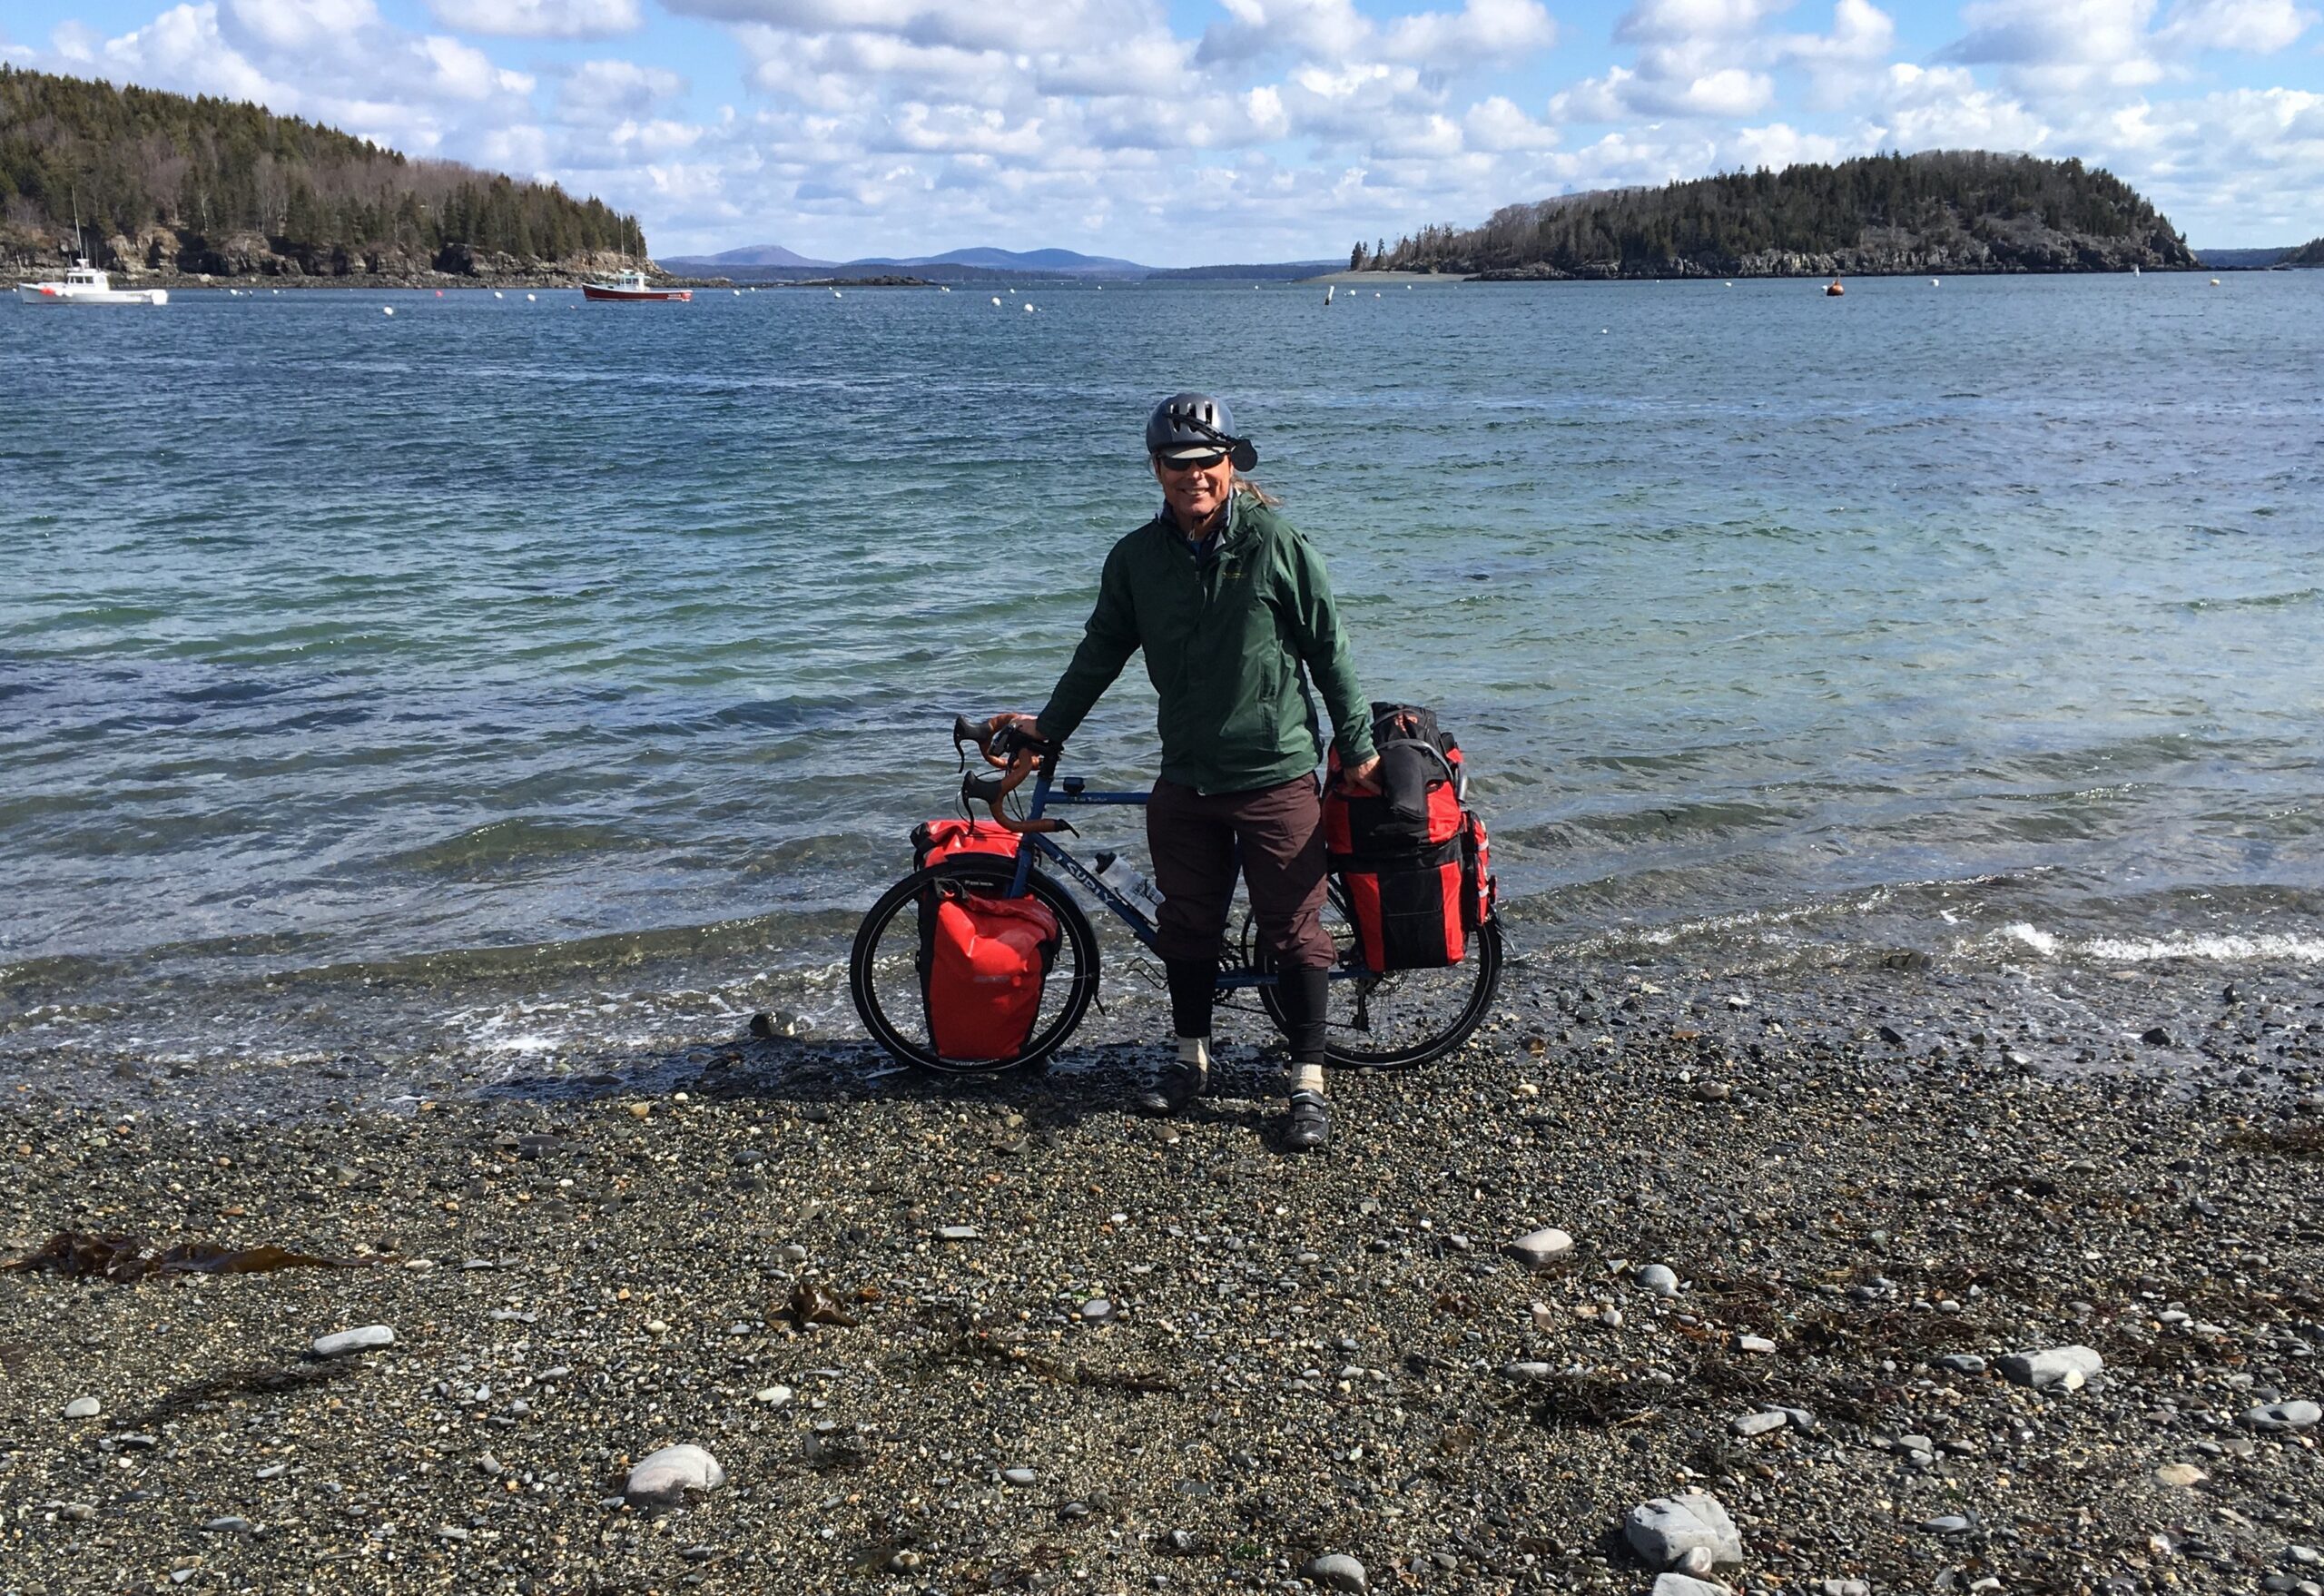 Wes standing with bike at the shore in Bar Harbor